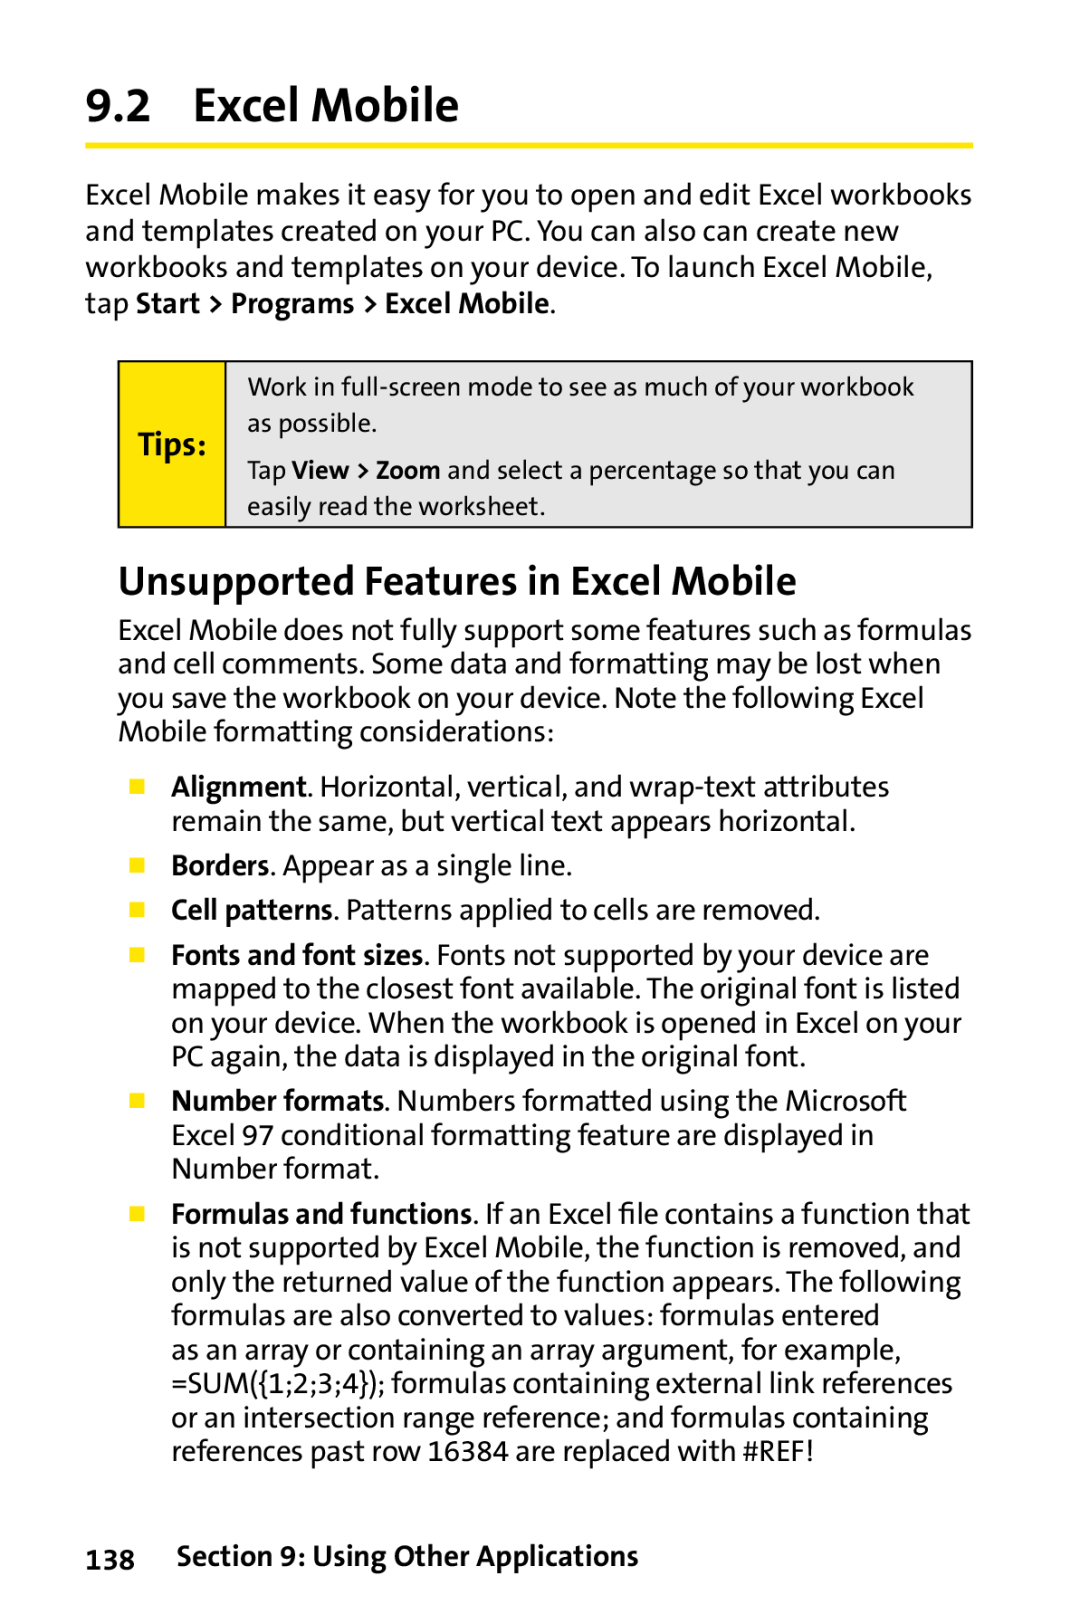 Sprint Nextel PPC-6700 manual Unsupported Features in Excel Mobile, Using Other Applications, Tips 